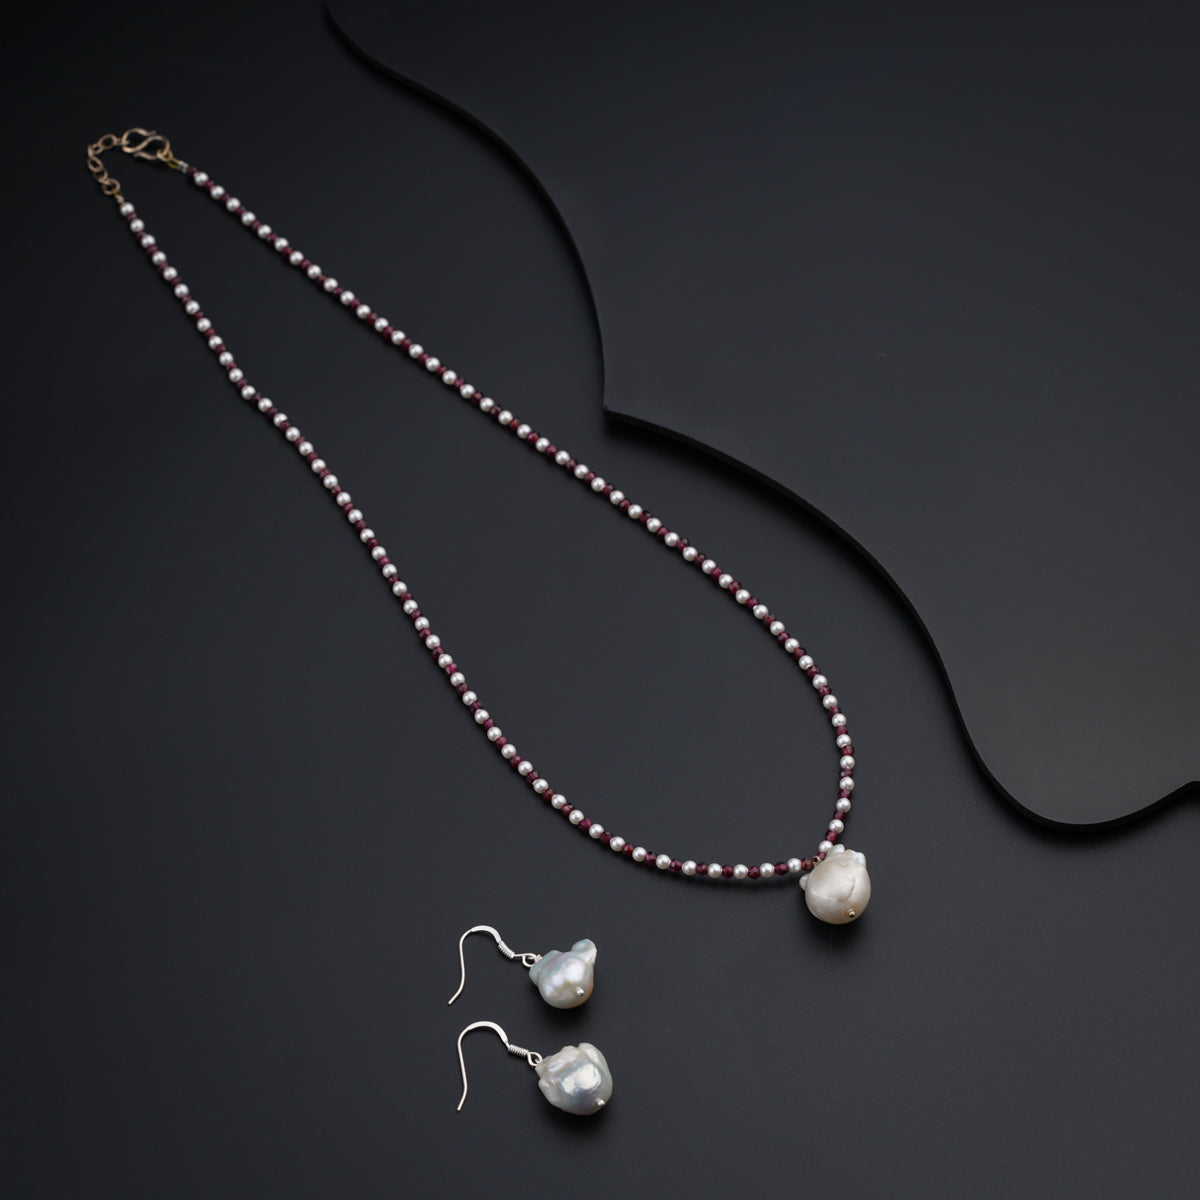 a necklace and earring with pearls on a black surface